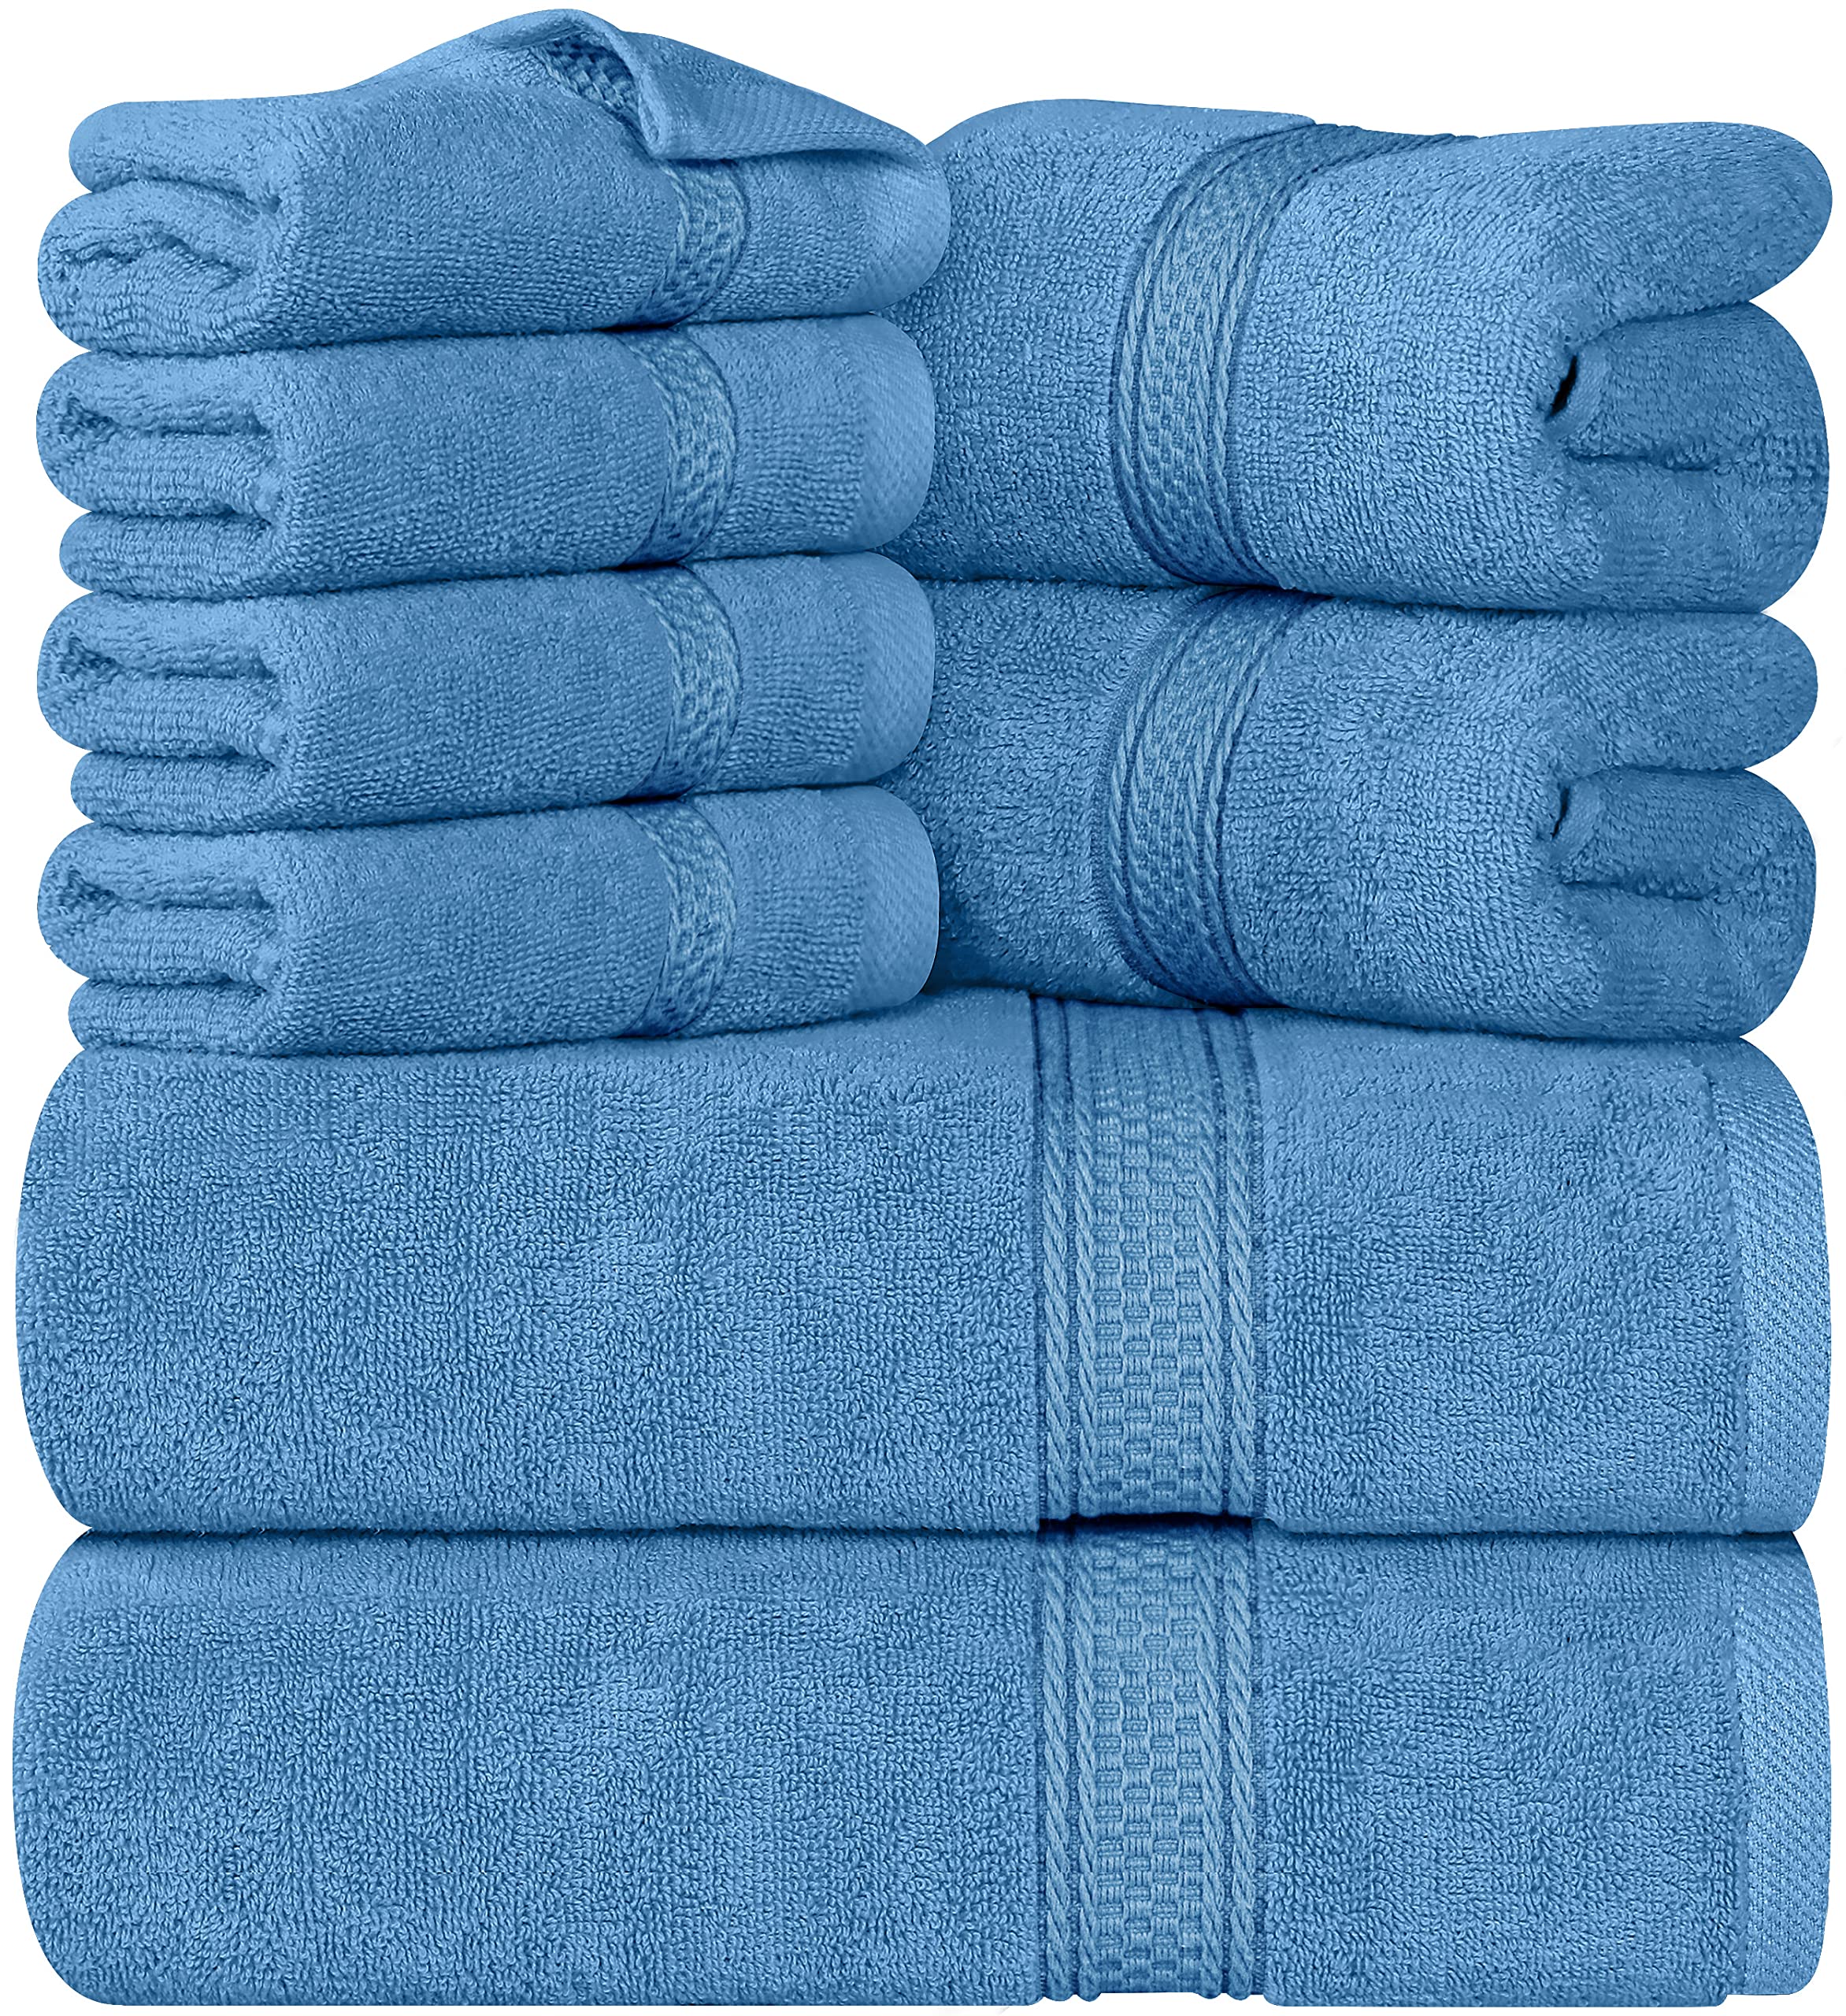 Book Cover Utopia Towels 8-Piece Premium Towel Set, 2 Bath Towels, 2 Hand Towels, and 4 Wash Cloths, 600 GSM 100% Ring Spun Cotton Highly Absorbent Towels for Bathroom, Gym, Hotel, and Spa (Electric Blue)